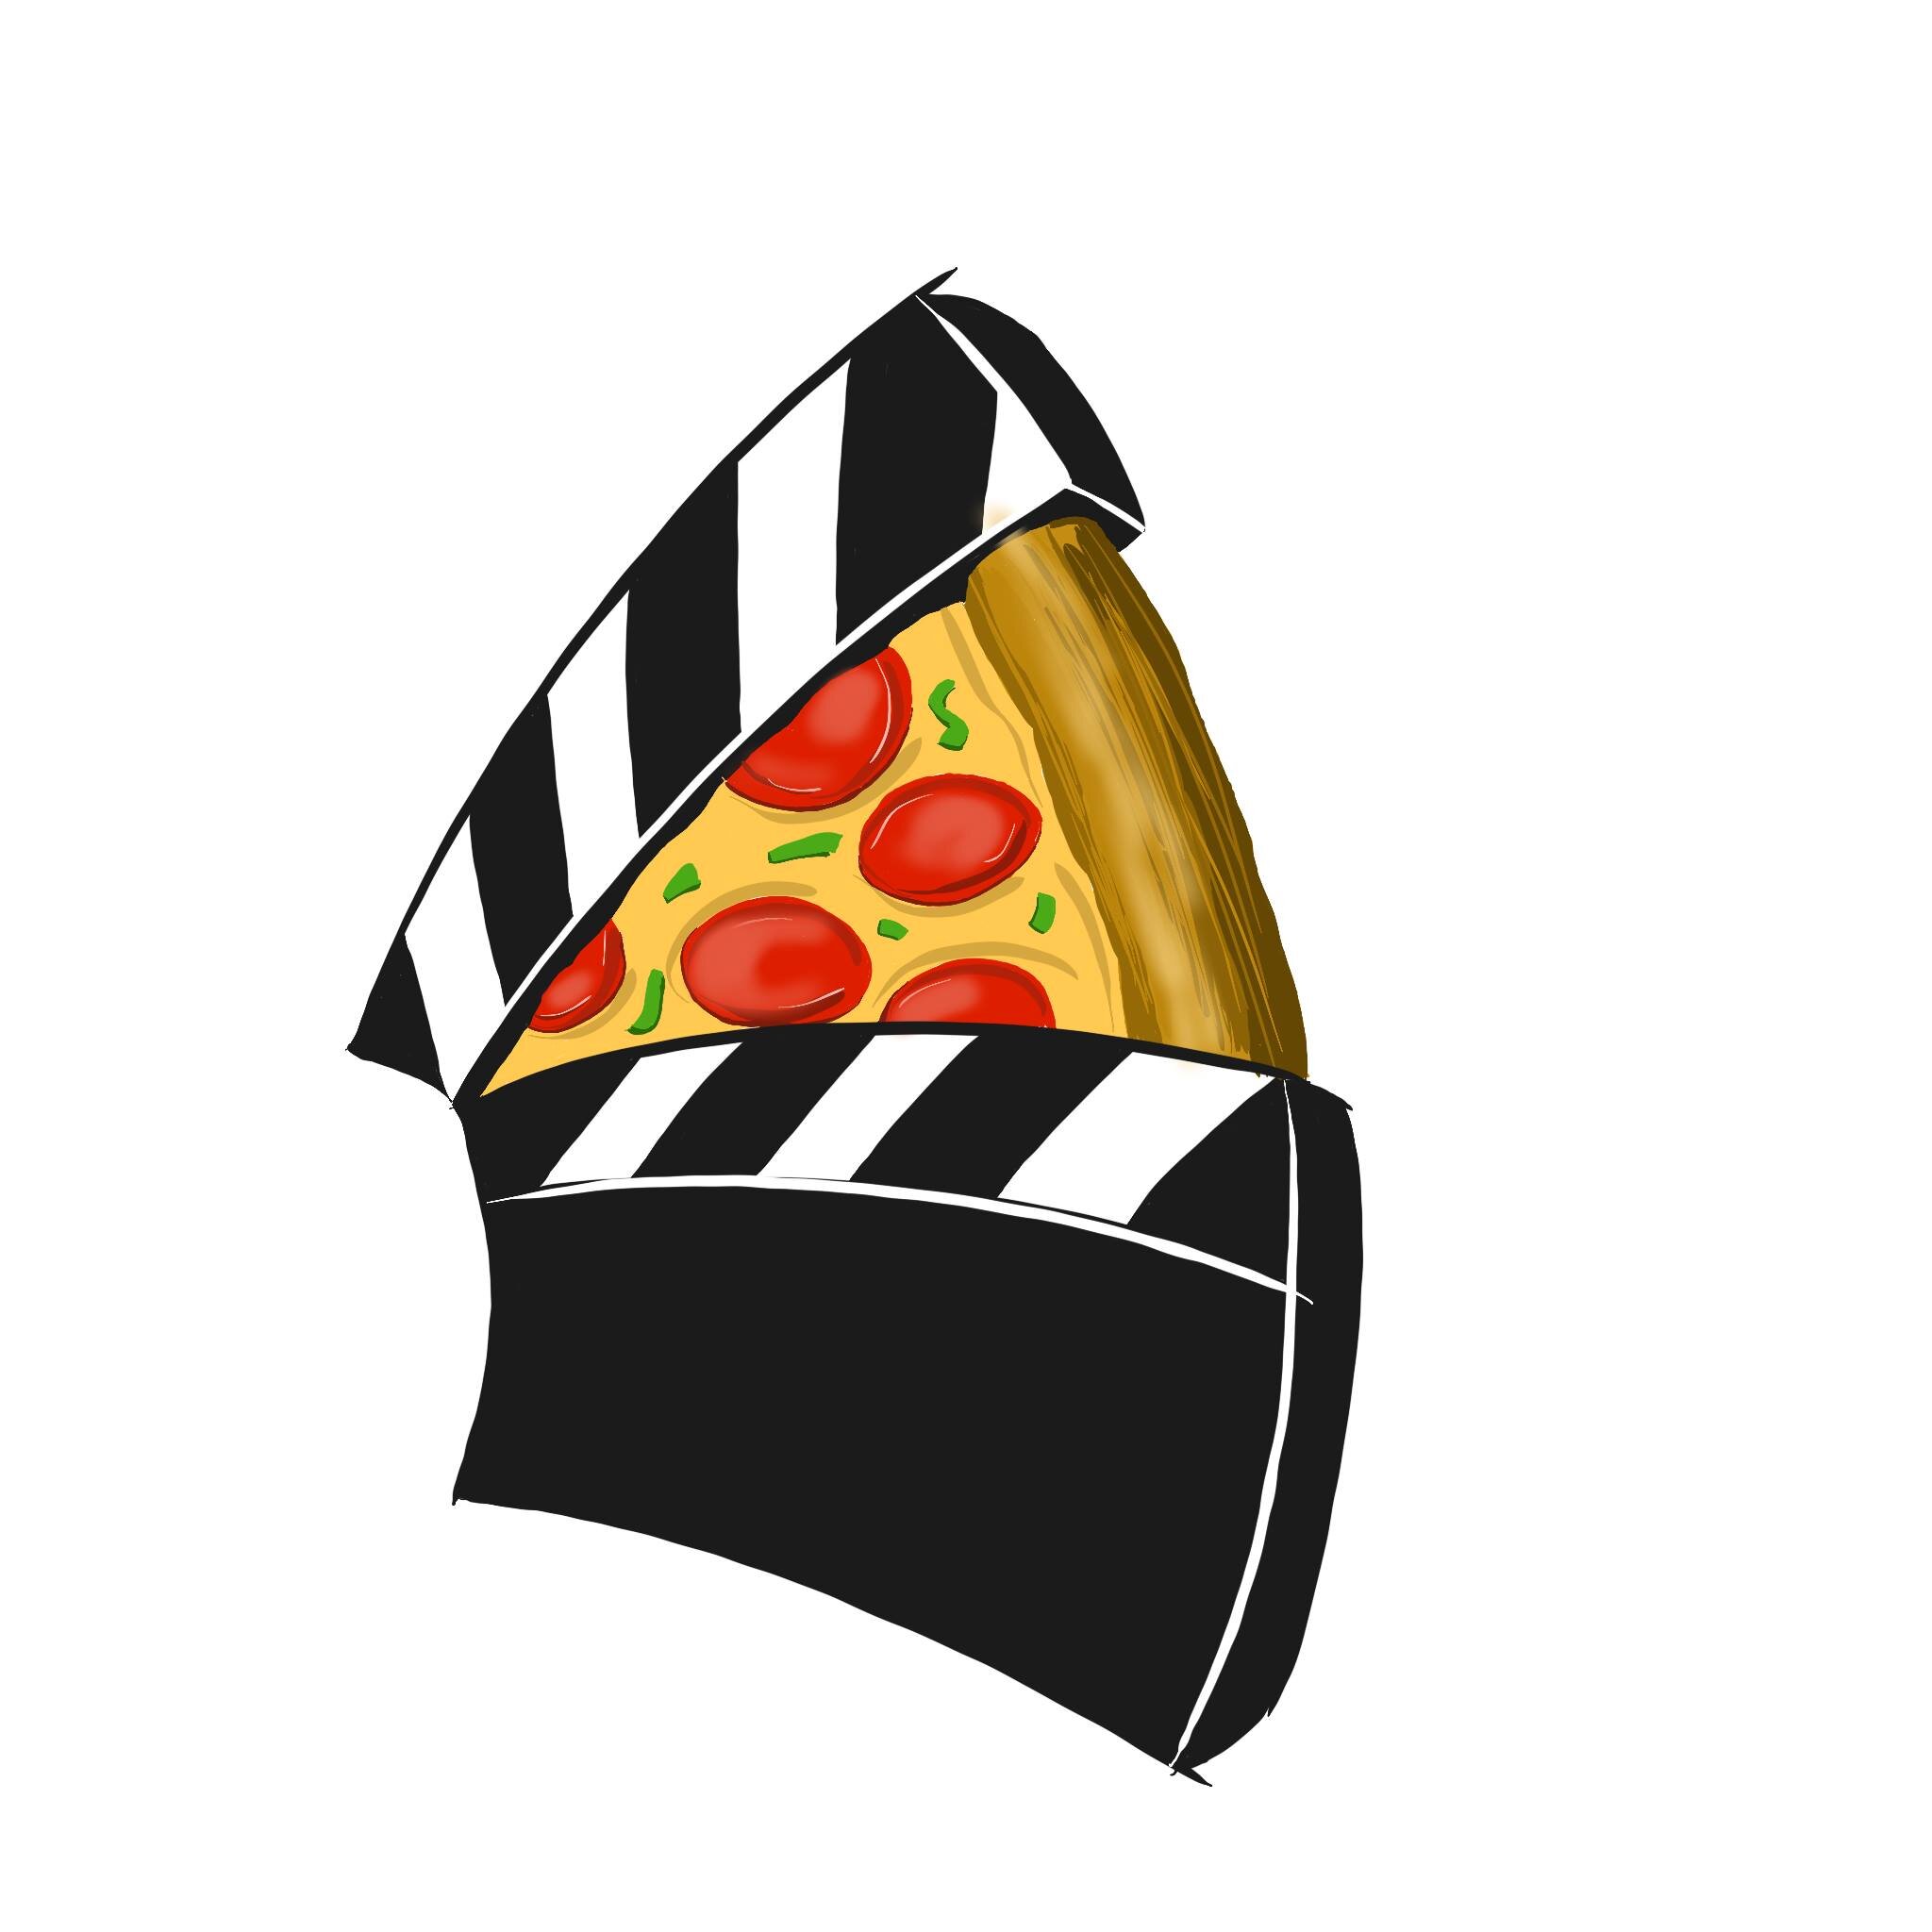 Your Pizza Adventure is an interactive movie-game app where you make the decisions to help Pizza Boy deliver his very first pizza. https://t.co/D4HZE78DqF